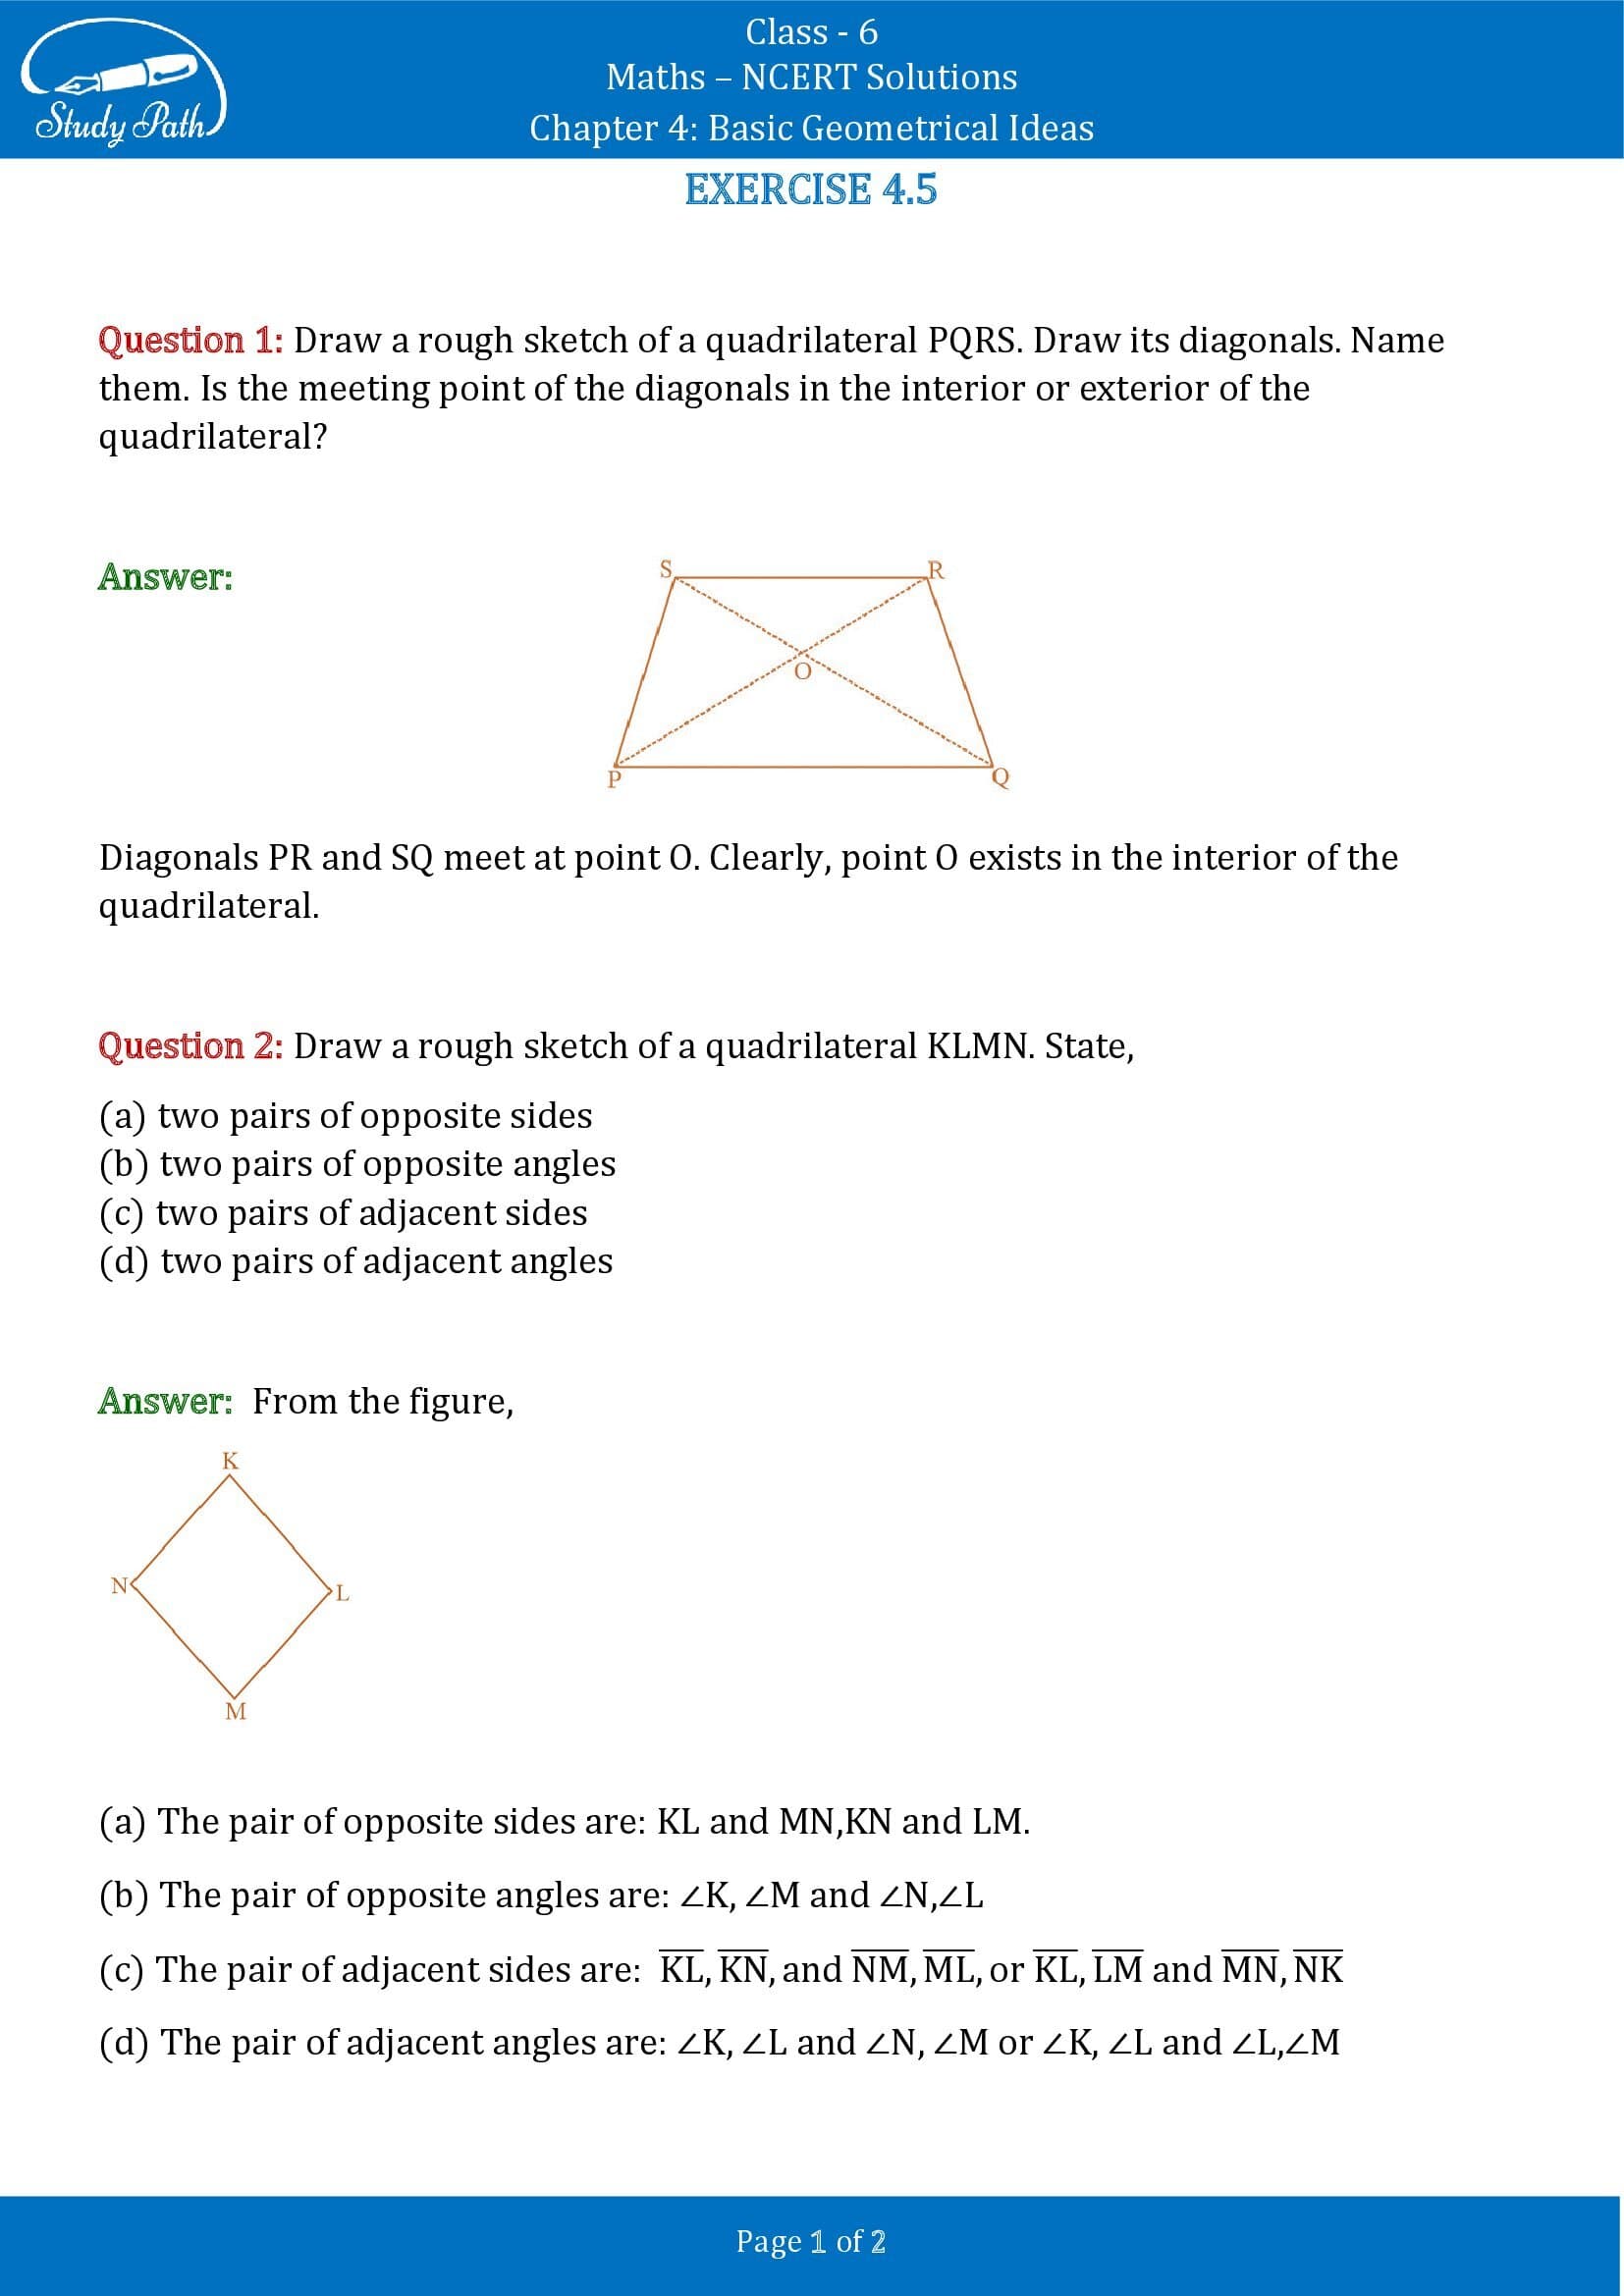 NCERT Solutions for Class 6 Maths Chapter 4 Basic Geometrical Ideas Exercise 4.5 00001